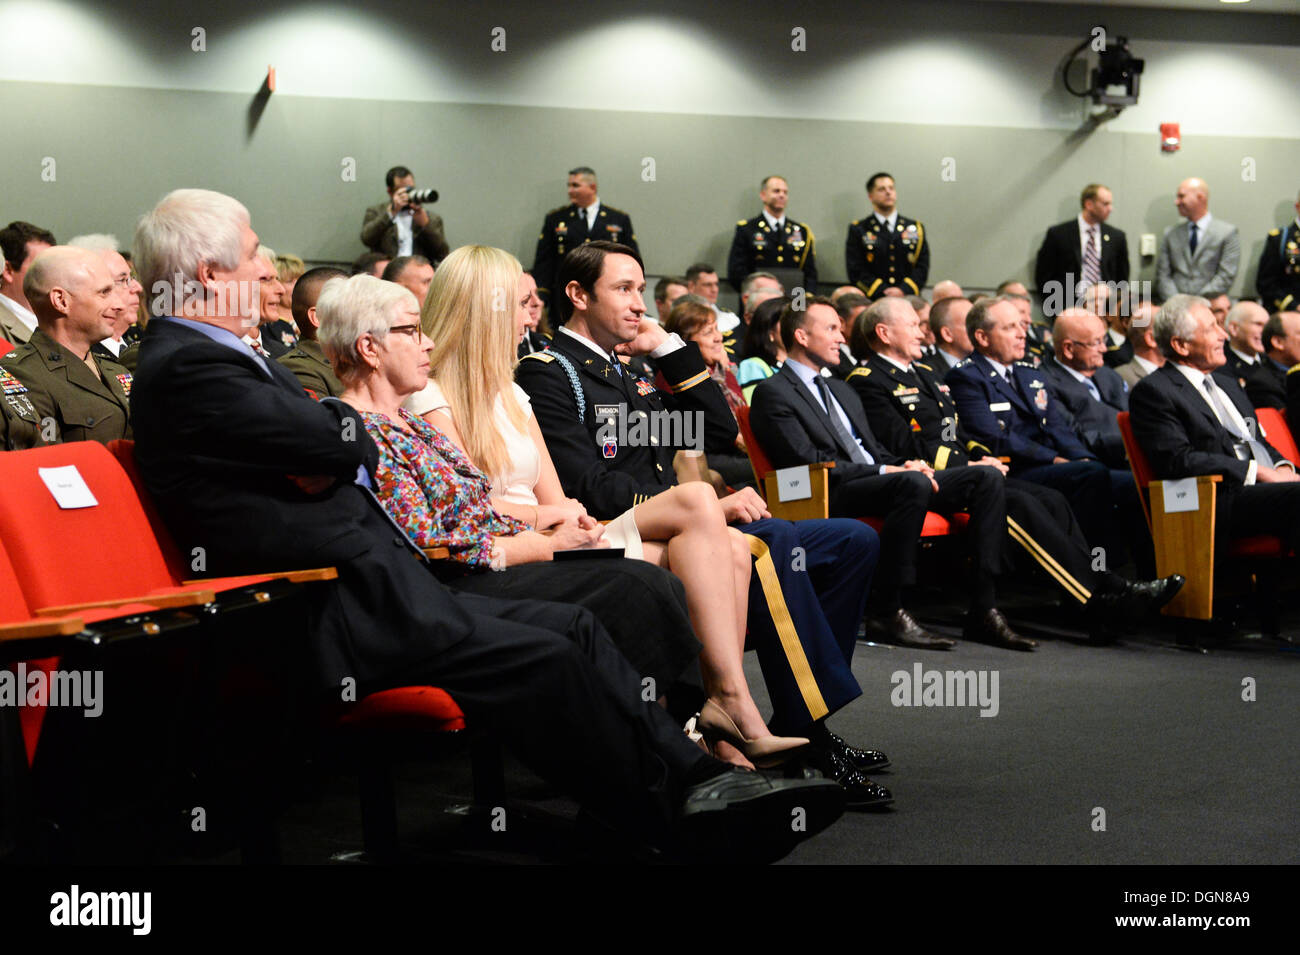 Former U.S. Army Capt. William D. Swenson, a Medal of Honor recipient, and his family at his Hall of Heroes Induction ceremony at the Pentagon in Washington, D.C., Oct 16, 2013. Stock Photo